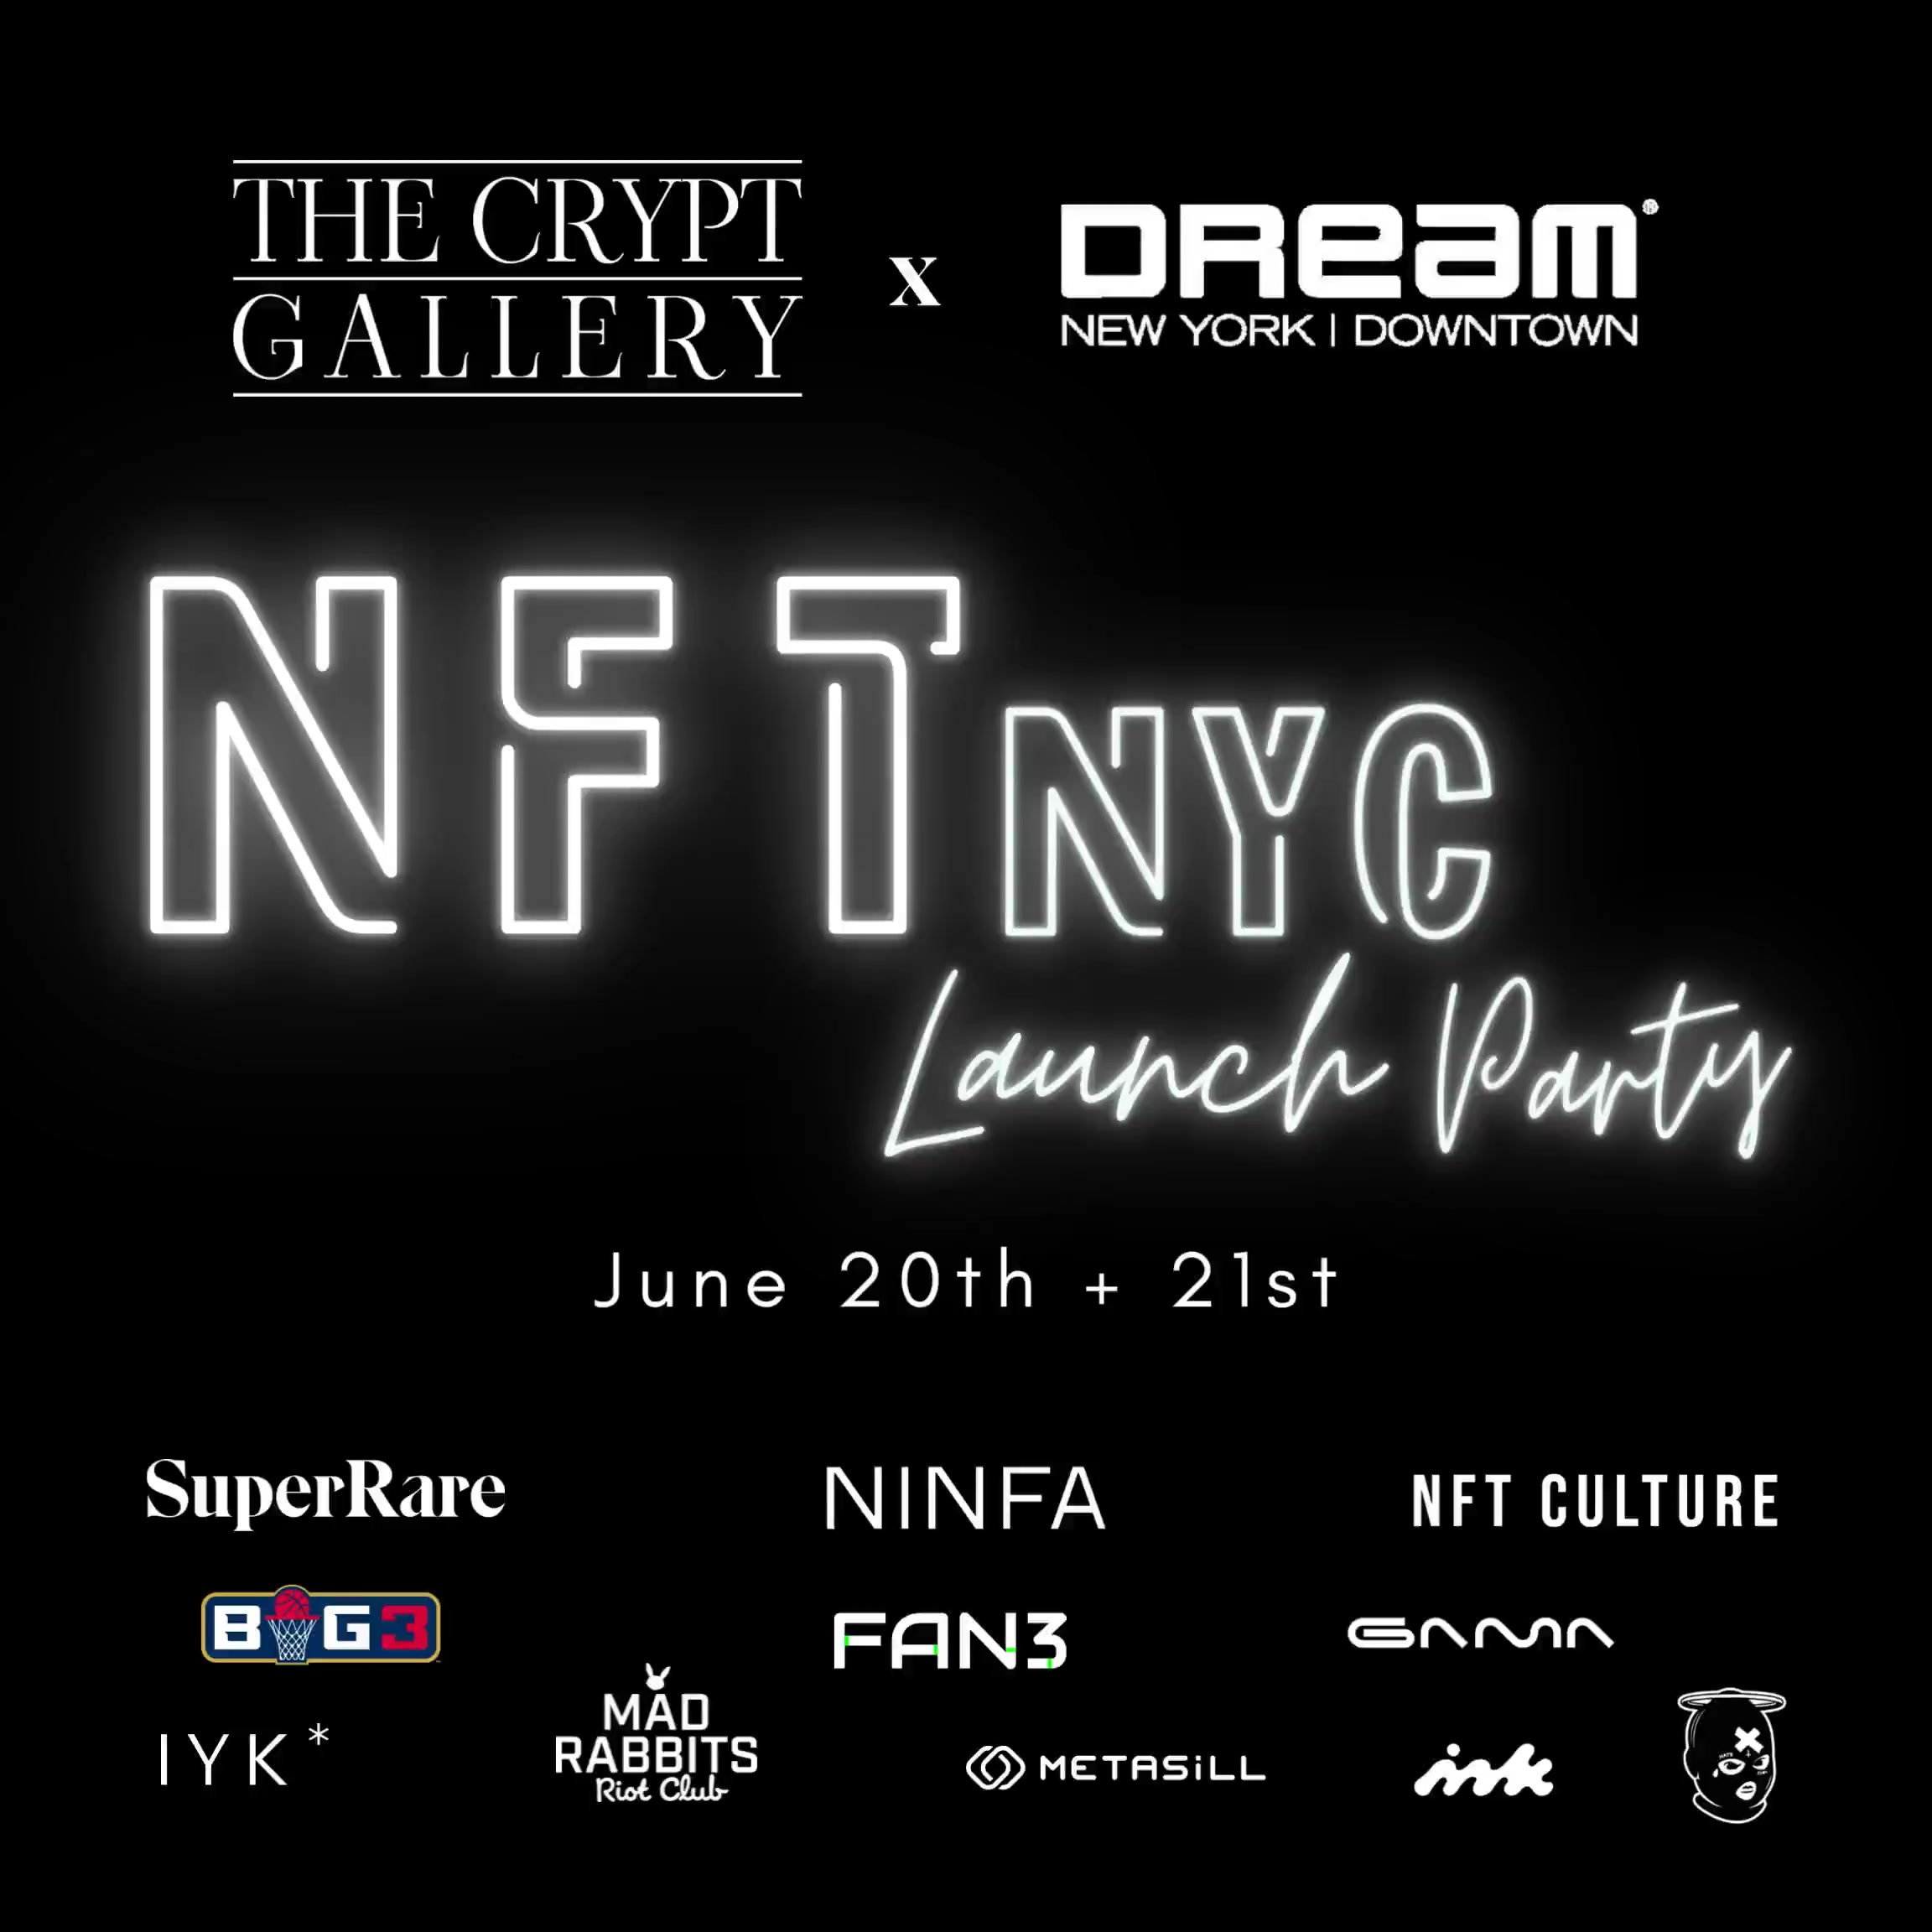 NFT NYC 2022: The Crypt Gallery x Dream Downtown Launch Party